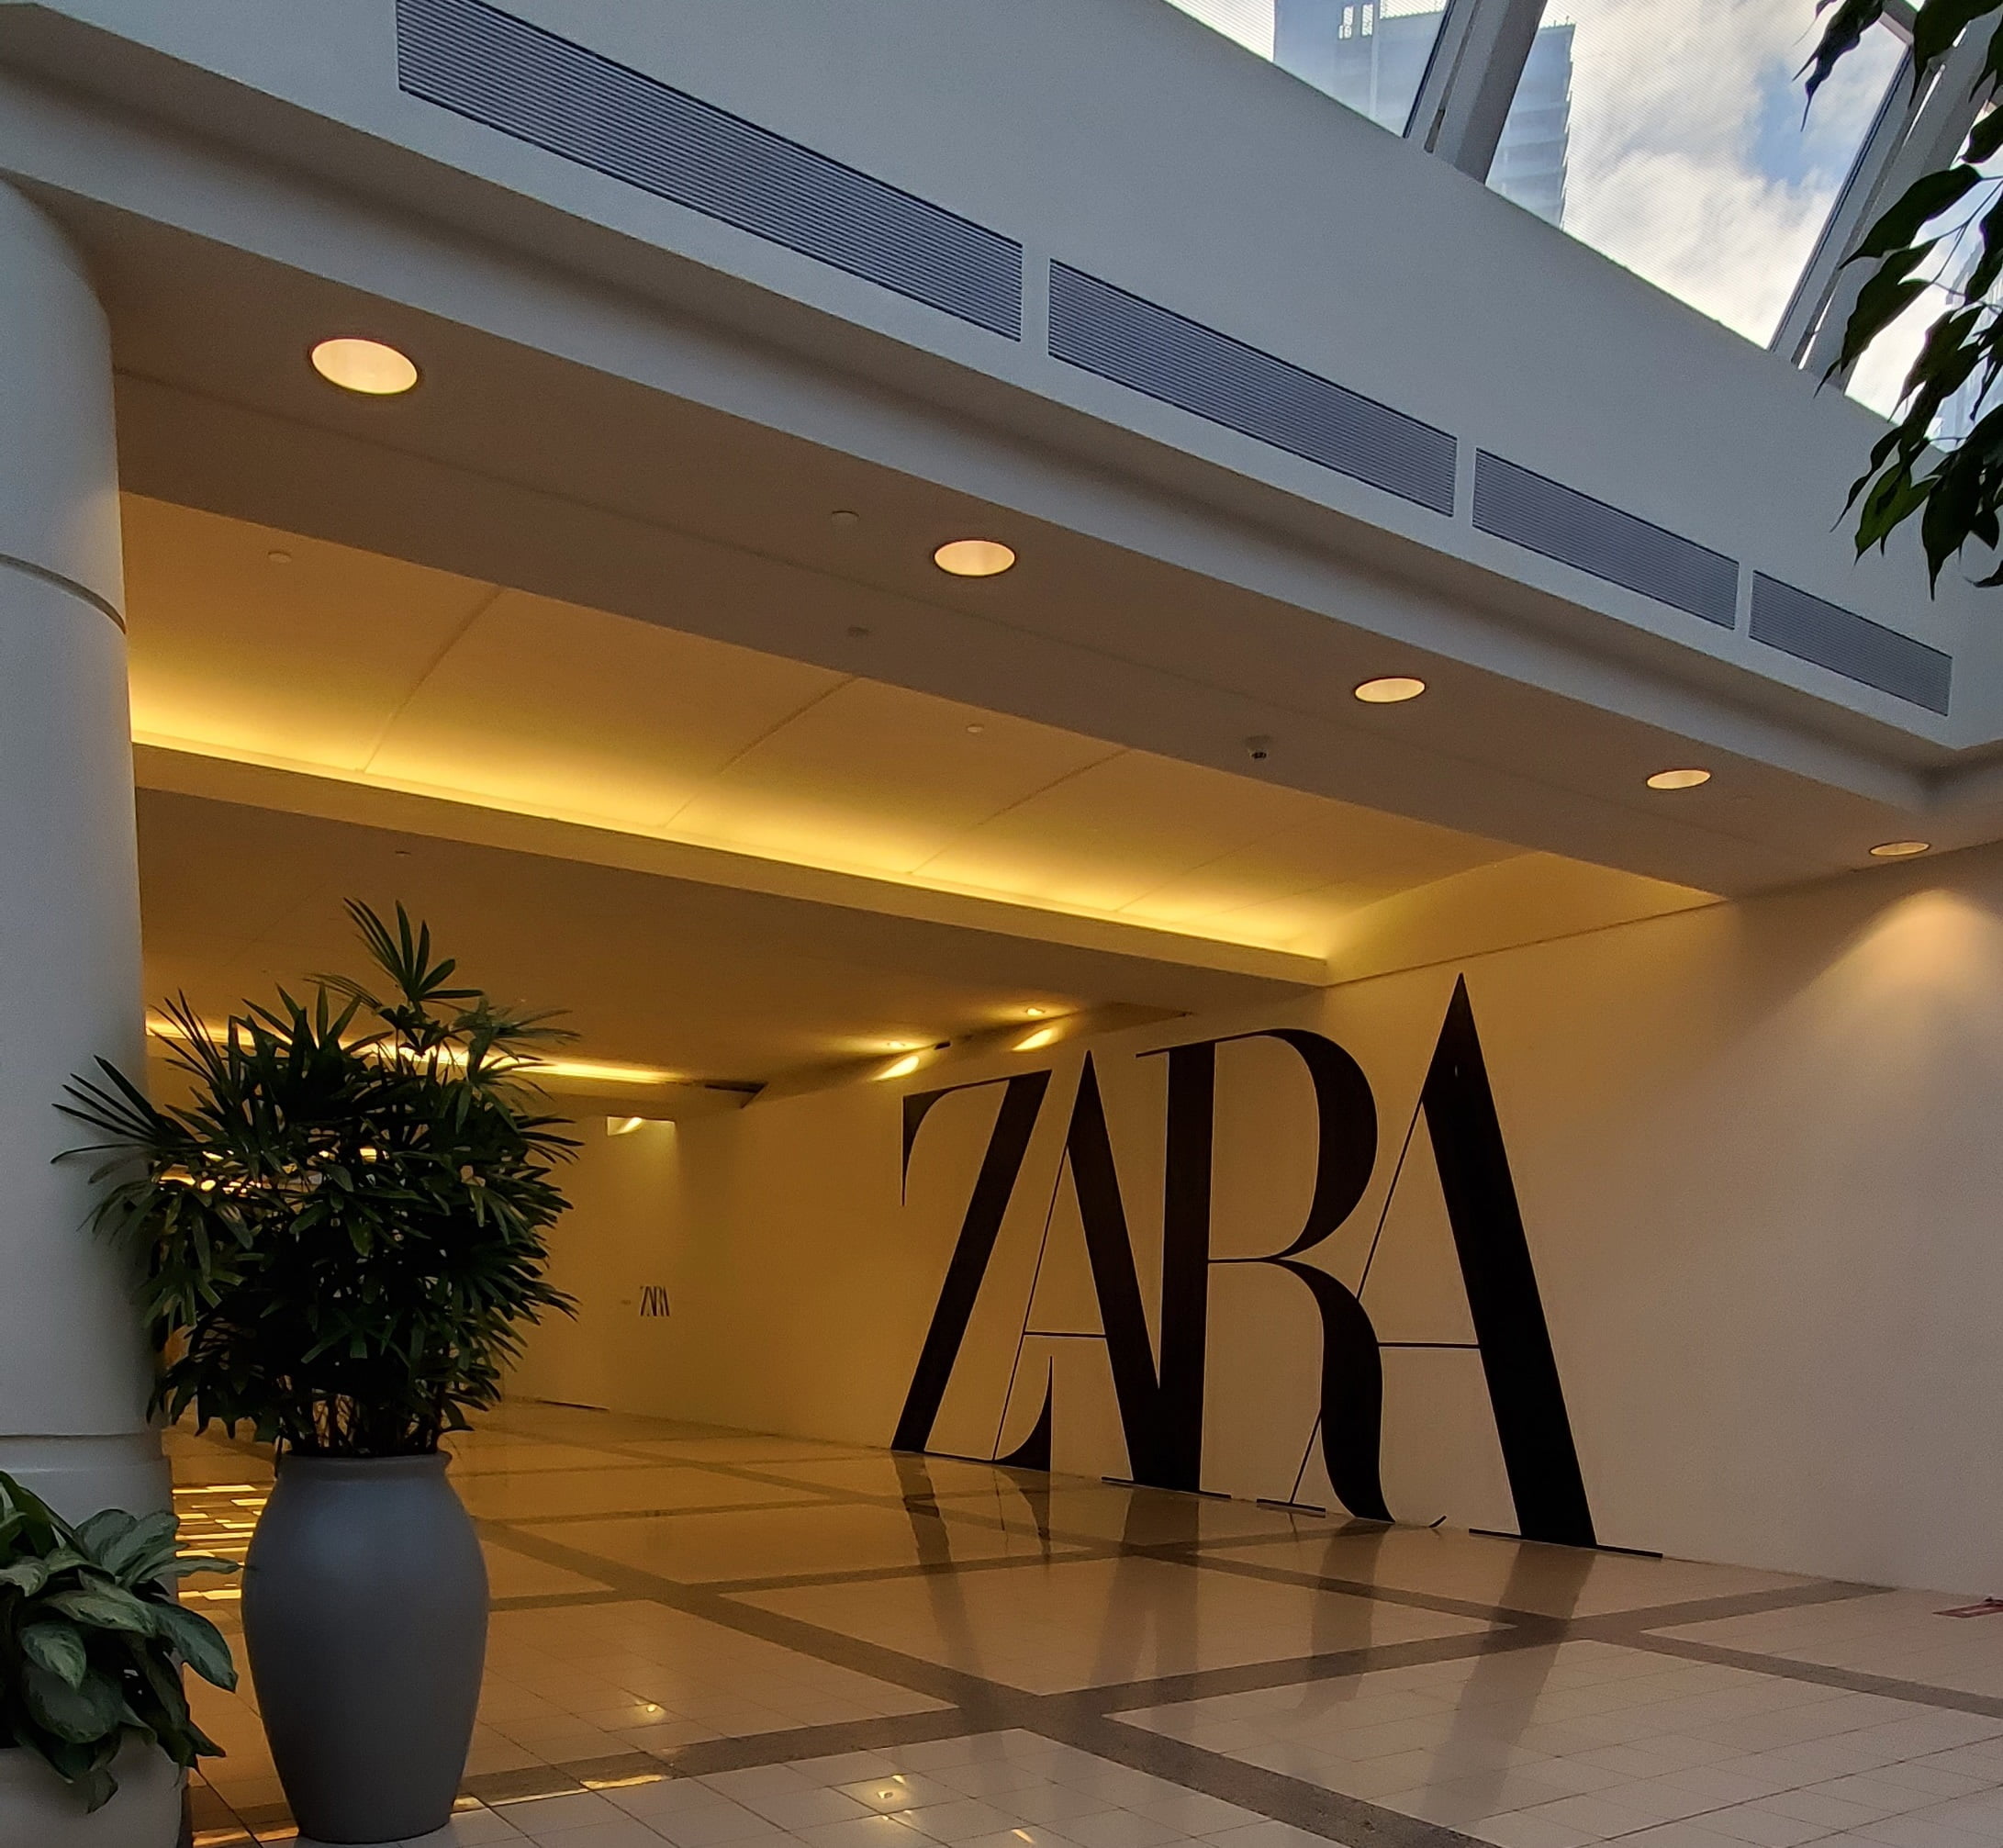 First look: Zara opens upsized store at Metrocentre